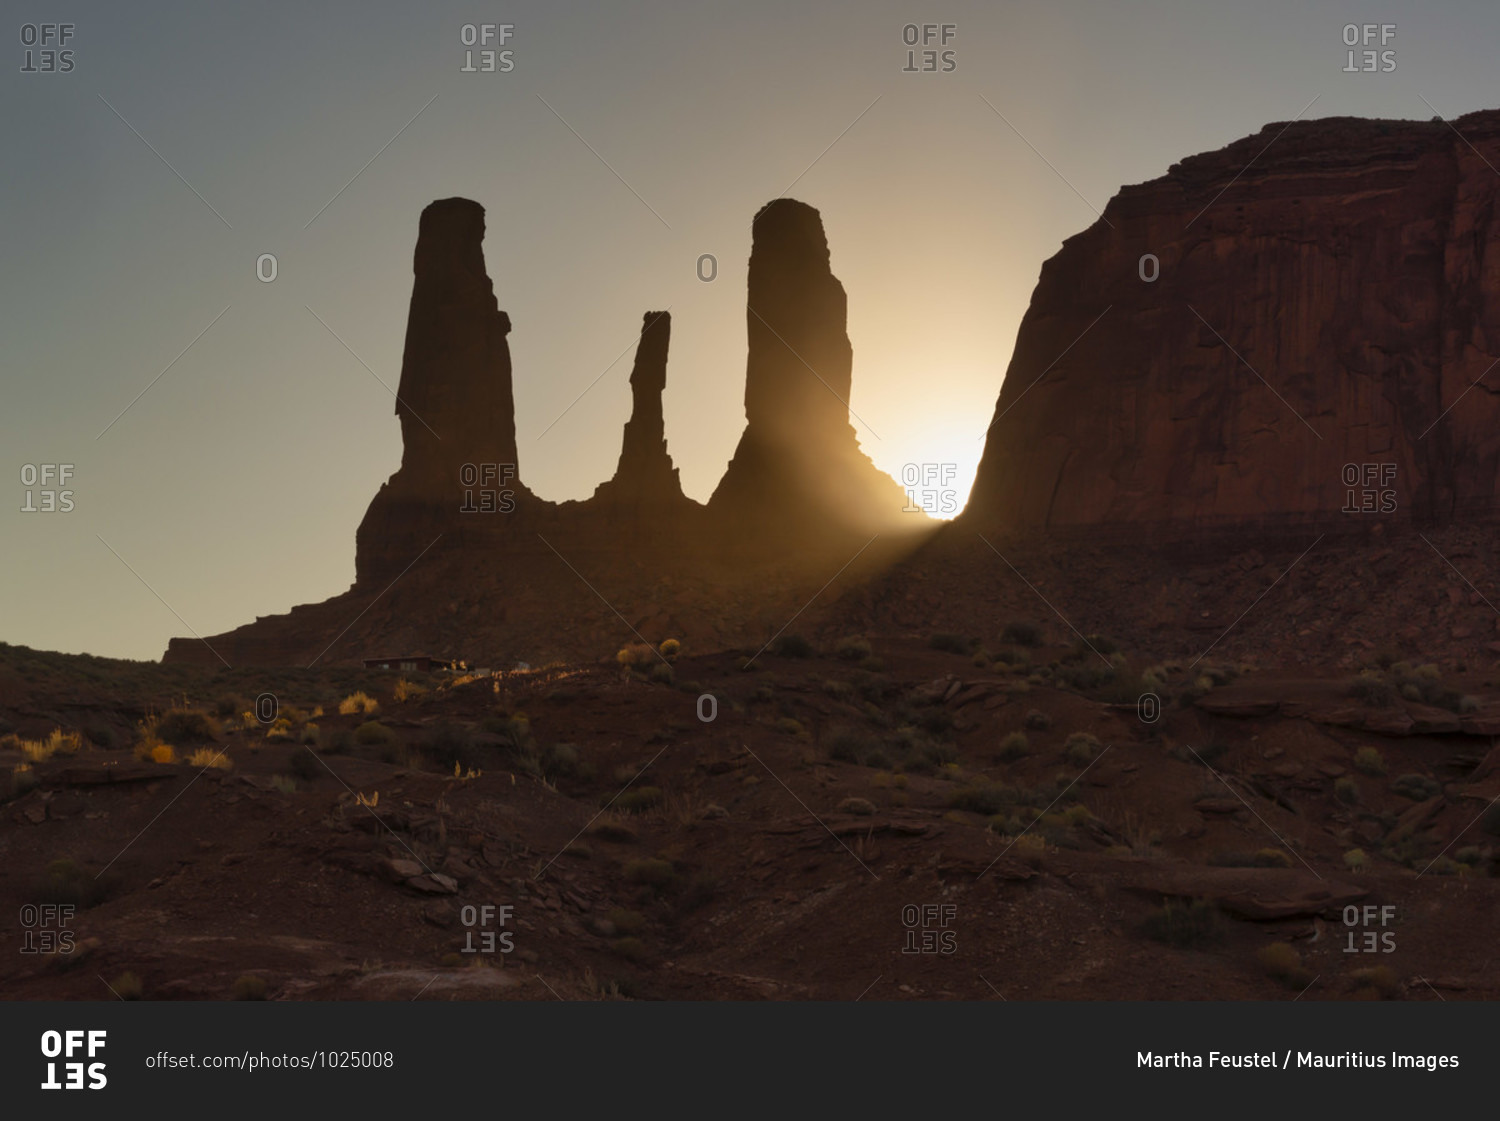 Monument Valley in Arizona, Navajo Indian Reservation, rock formations in the evening light